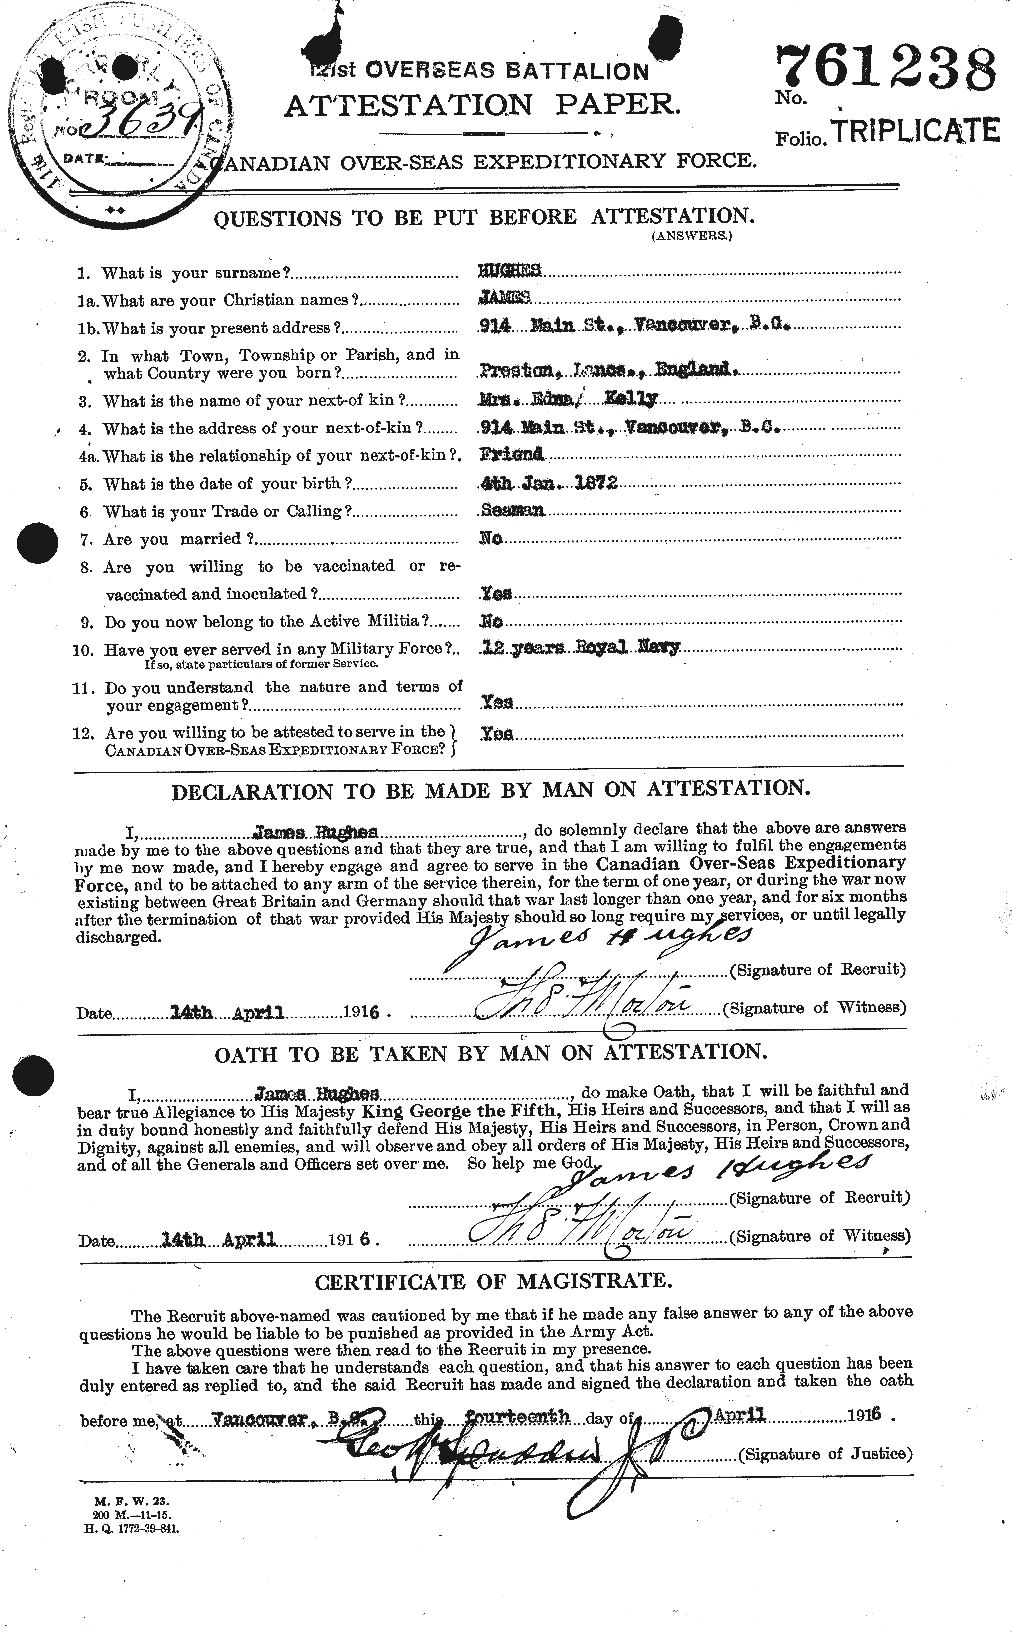 Personnel Records of the First World War - CEF 403951a